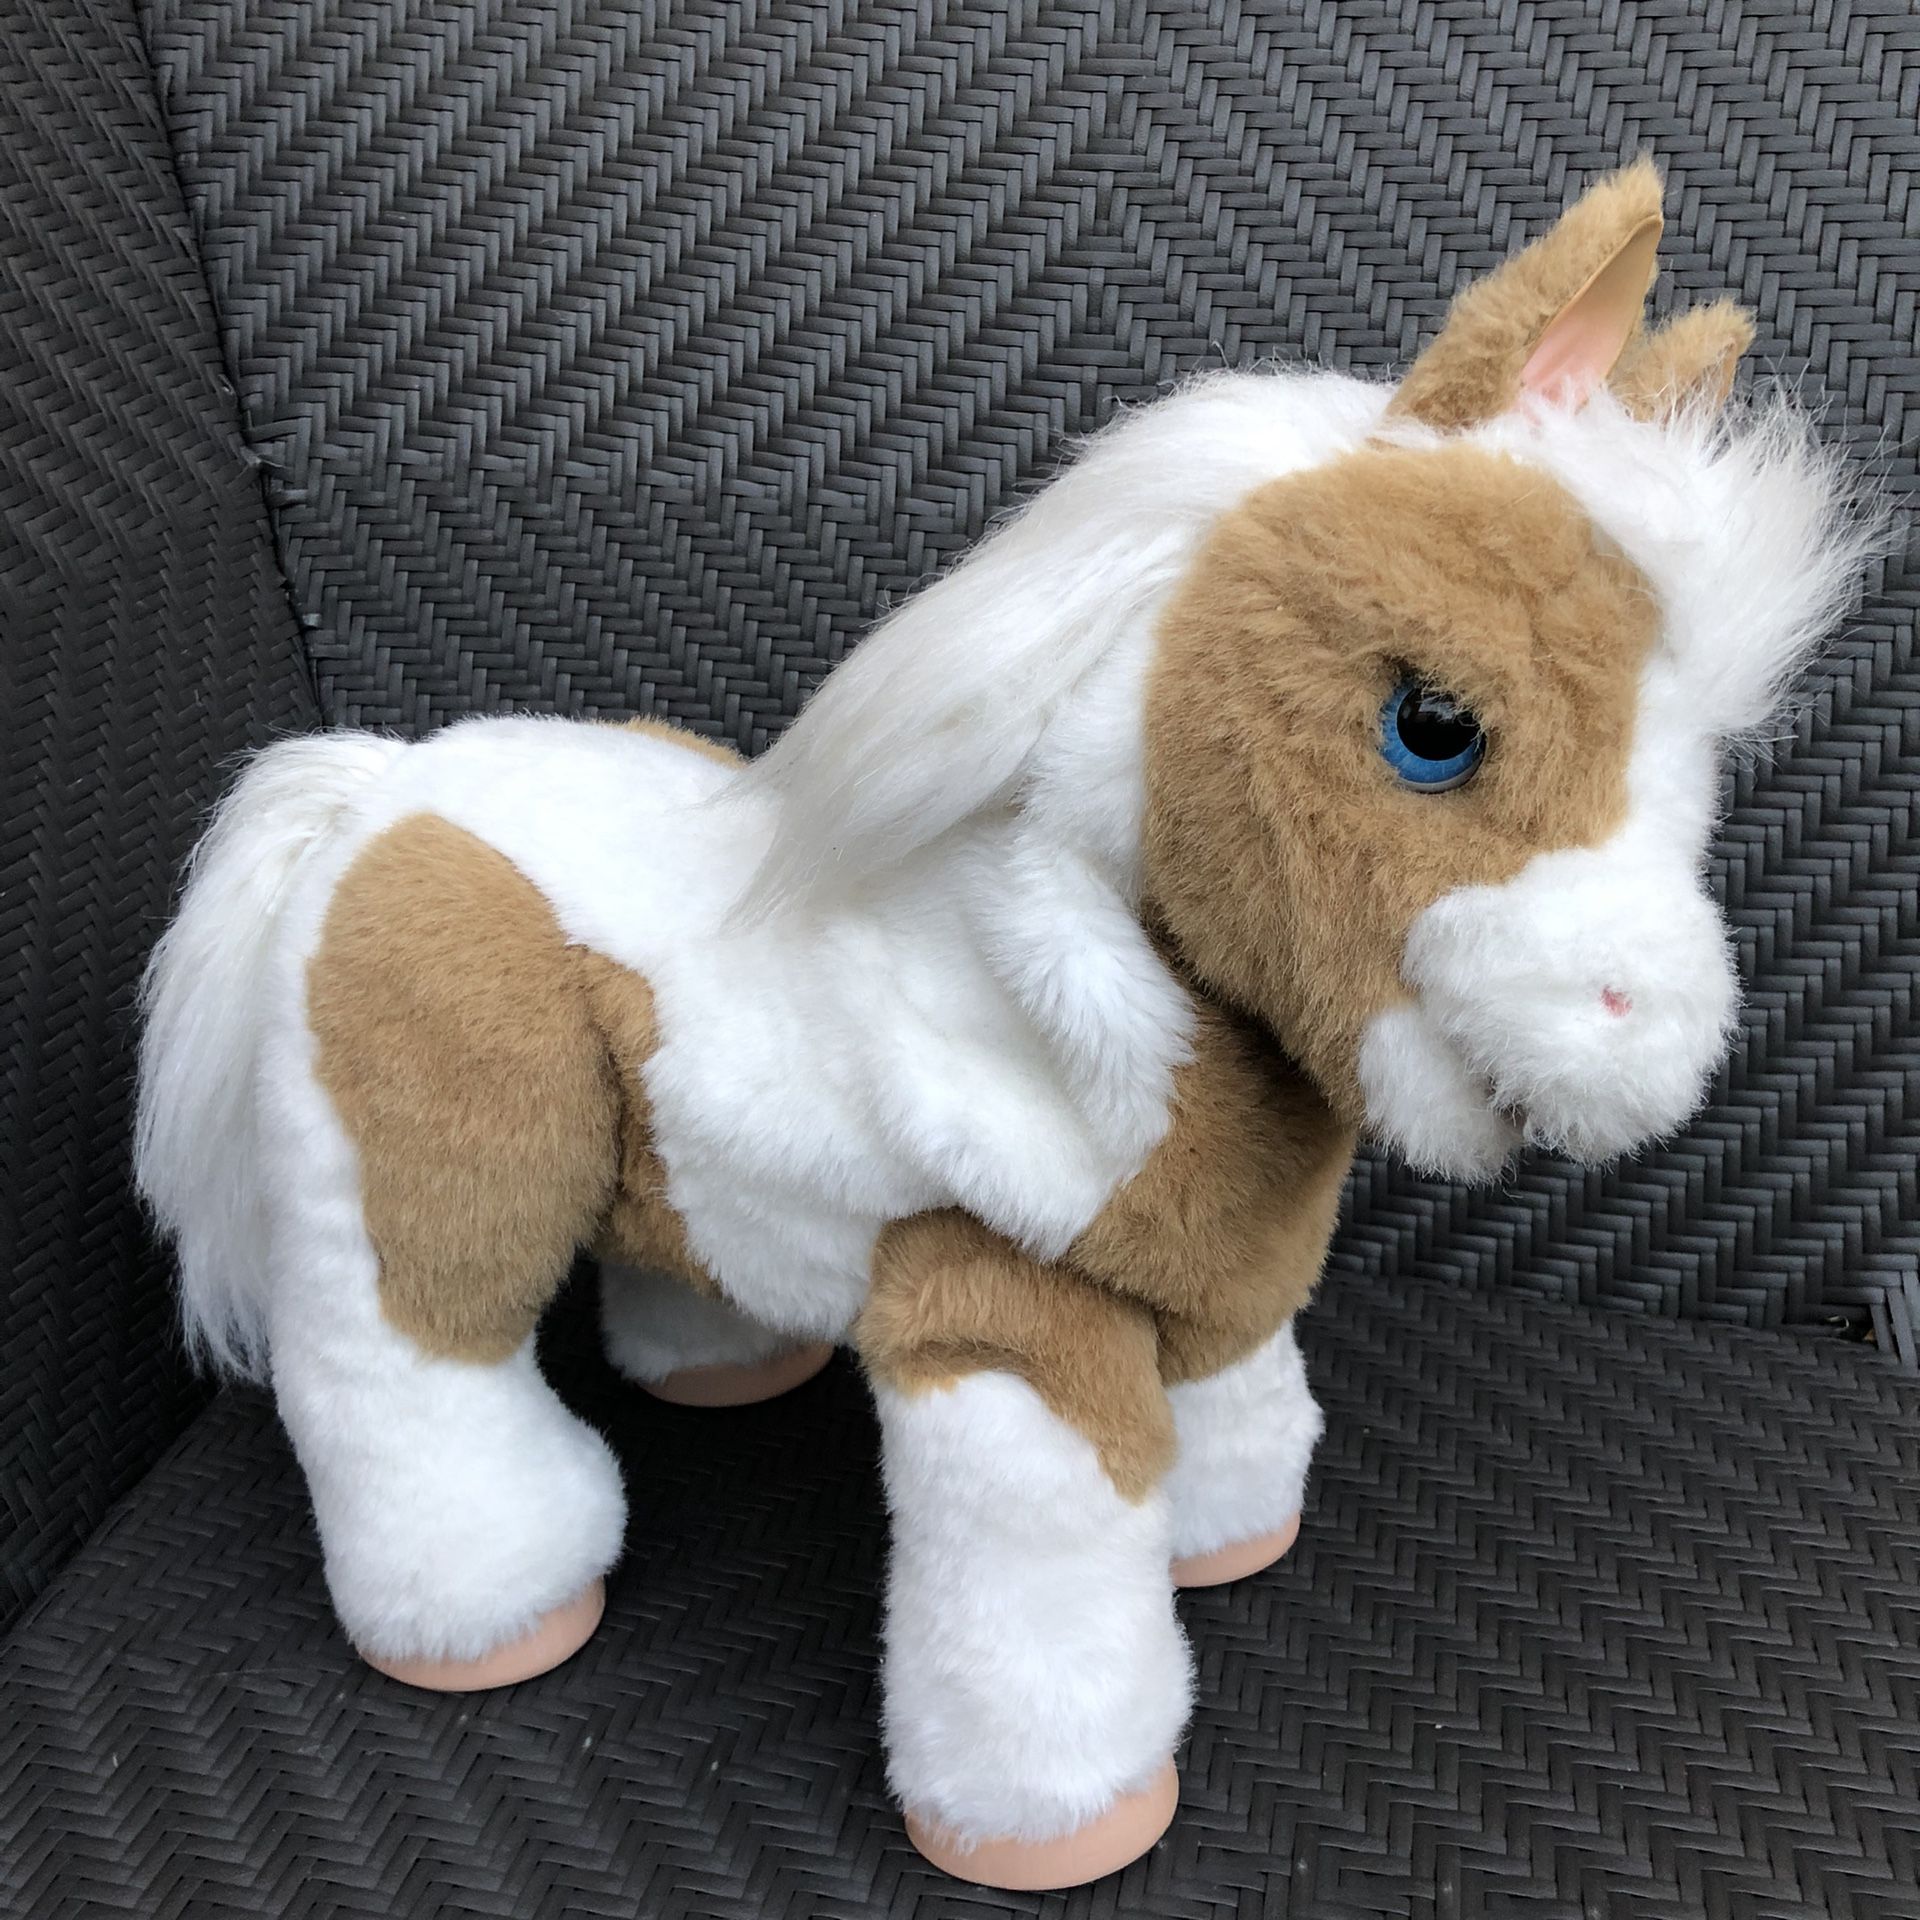 Furreal Friends Large Pony Interactive Pony 17 inches from his ear to hoof